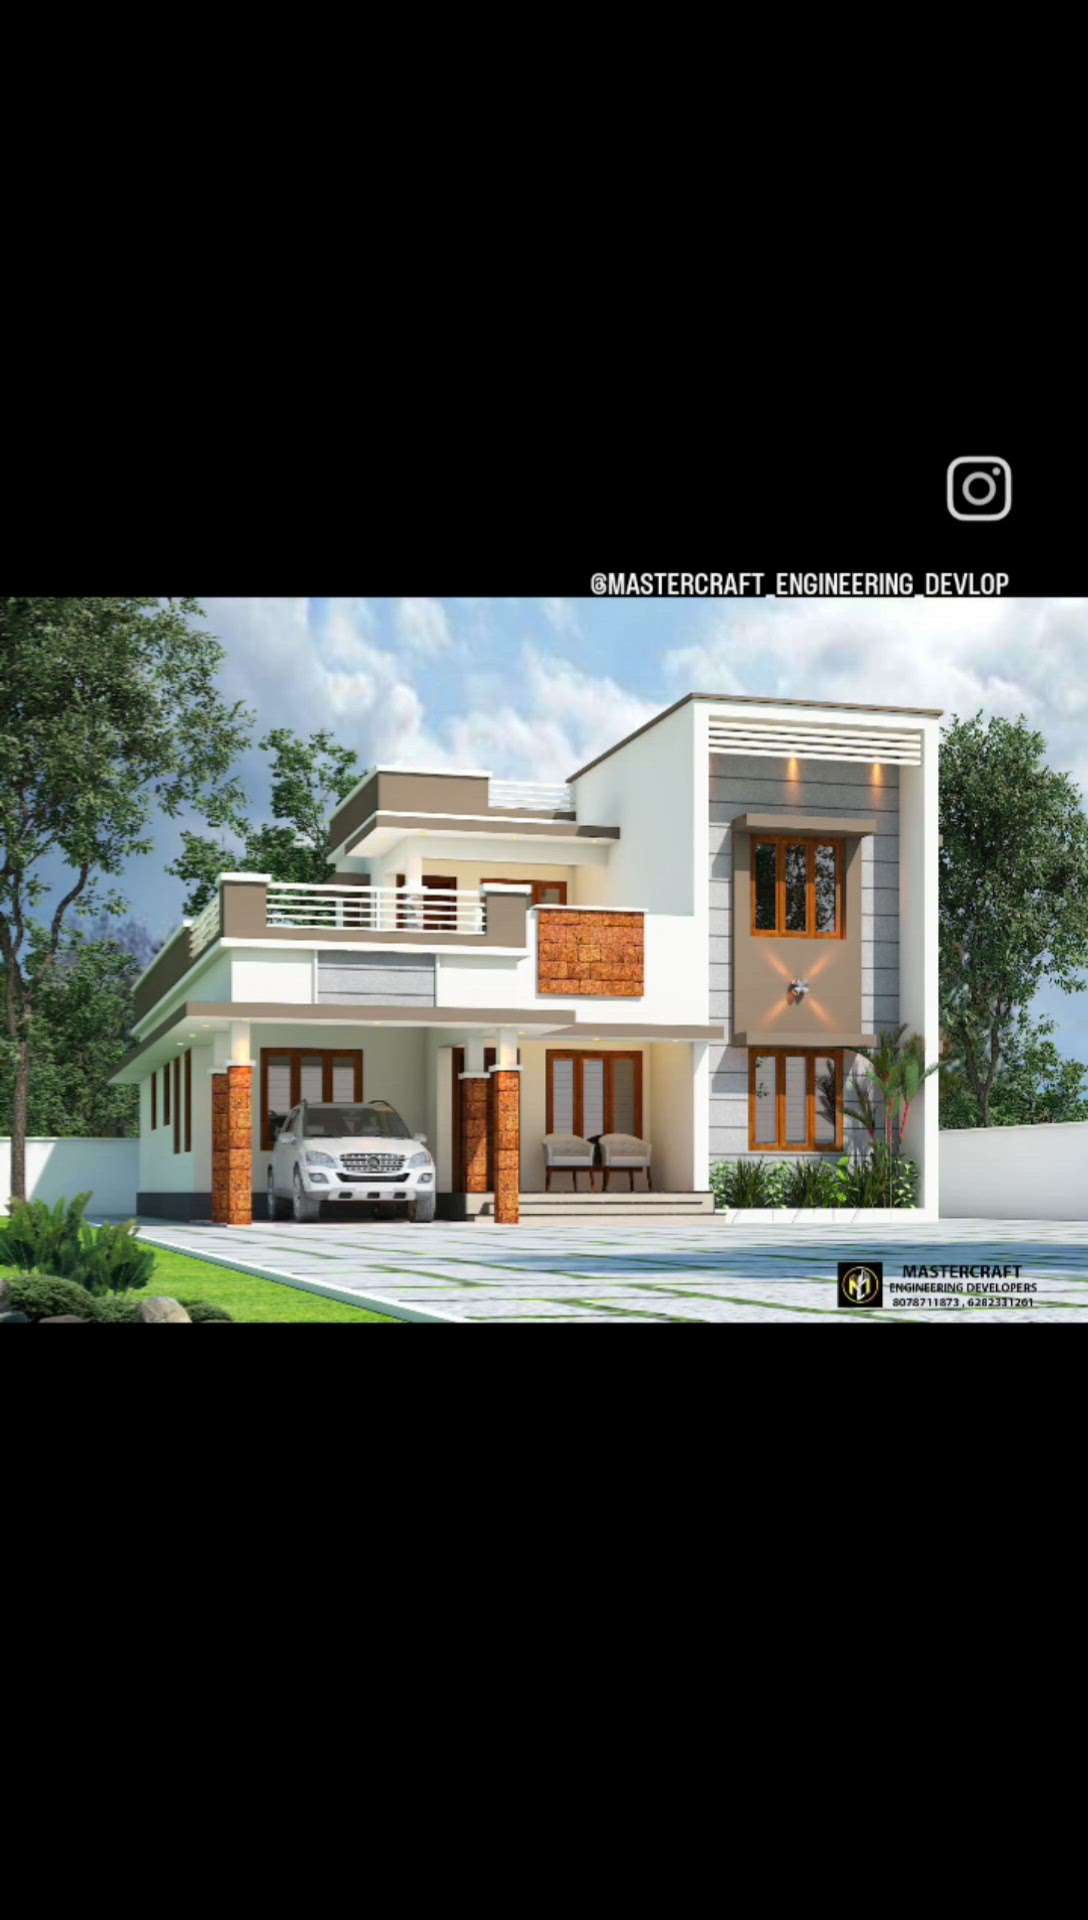 2500 sq ft 4bhk ഉള്ള നല്ല ഒരു അടിപൊളി ഭവനം 

Build your Dream With Us 

MASTERCRAFT Engineering Devlopers 

client Ramesh 

location Thrissur ettumana 

#4BHKPlans 
#4BHKHouse 
#ContemporaryHouse 
#3d 
#3dmodeling 
#Contractor 
#CivilEngineer 
#engineers 
#professionals 
#professionalism 
#HouseDesigns 
#HouseConstruction 
#constructionsite 
#homeconstruction 
#himedecoration 
#HomeDecor 
#ElevationHome 
#homesweethome 
#godsowncountry 
#KeralaStyleHouse 
#keralahomeplans 
#Thrissur 
#thrissurbuilders 
#irinjalakuda 
#Irinjalakkuda 
#chalakudy 
#arattupuzha 
#mastercraftbuilders 
#mastercraftengineeringdevlopers
 #Designs